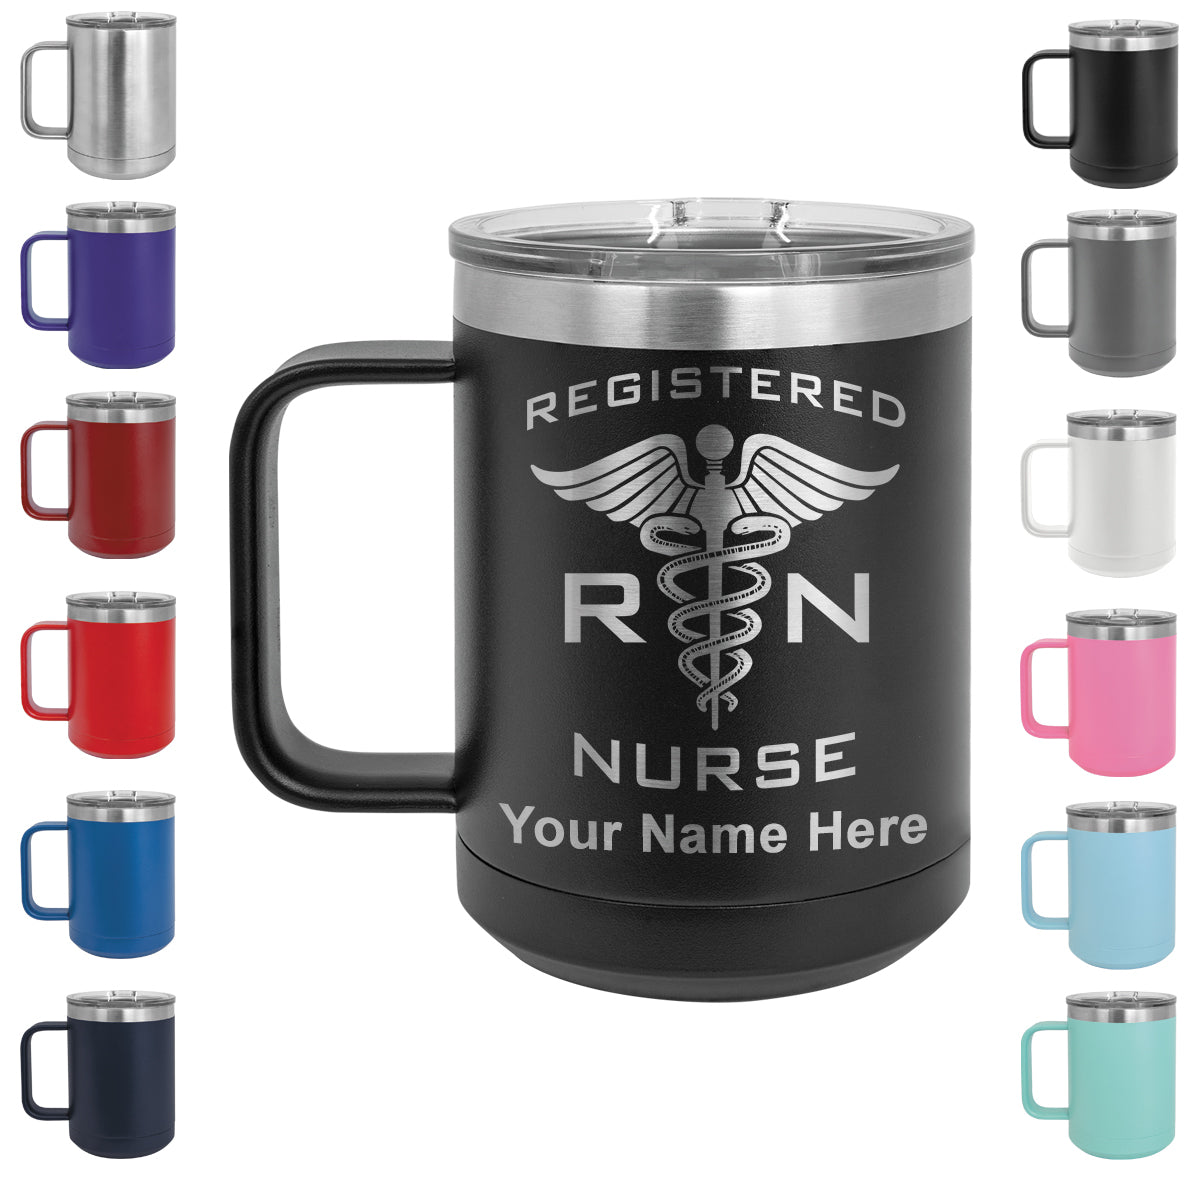 15oz Vacuum Insulated Coffee Mug, RN Registered Nurse, Personalized Engraving Included